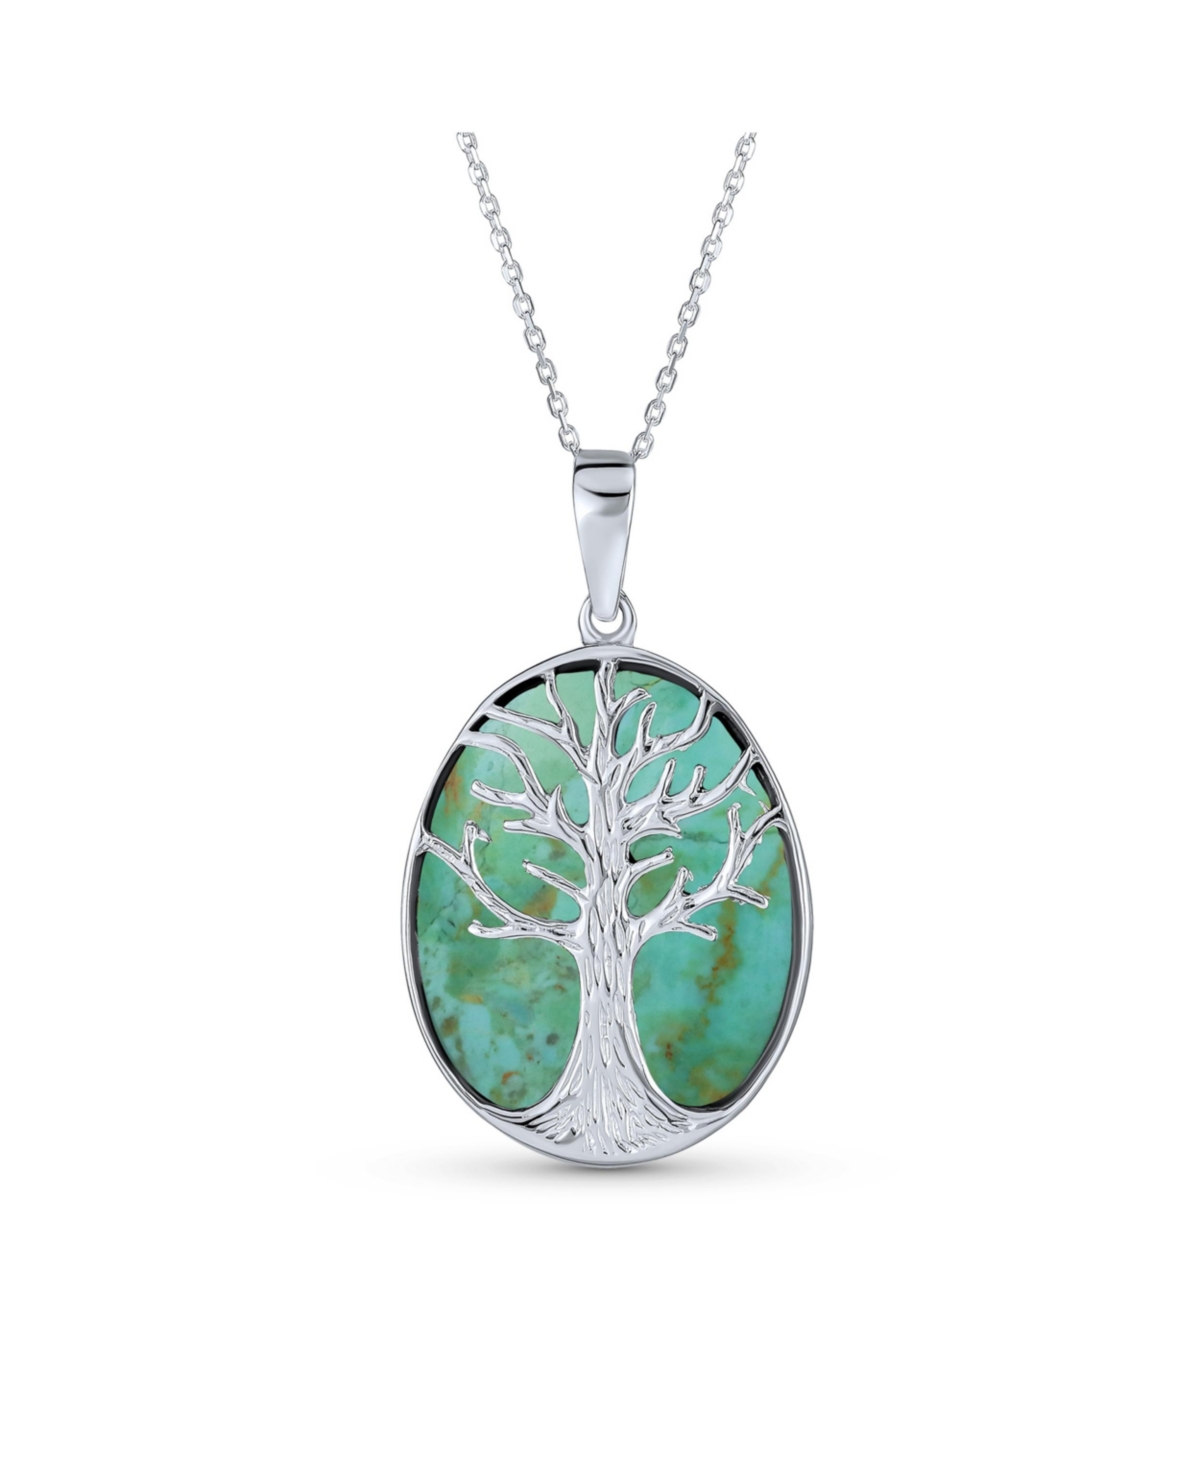 Blue Turquoise Large Oval Wishing Tree Family Tree Of Life Pendant Necklace Western Jewelry For Women .925 Sterling Silver - Aqua